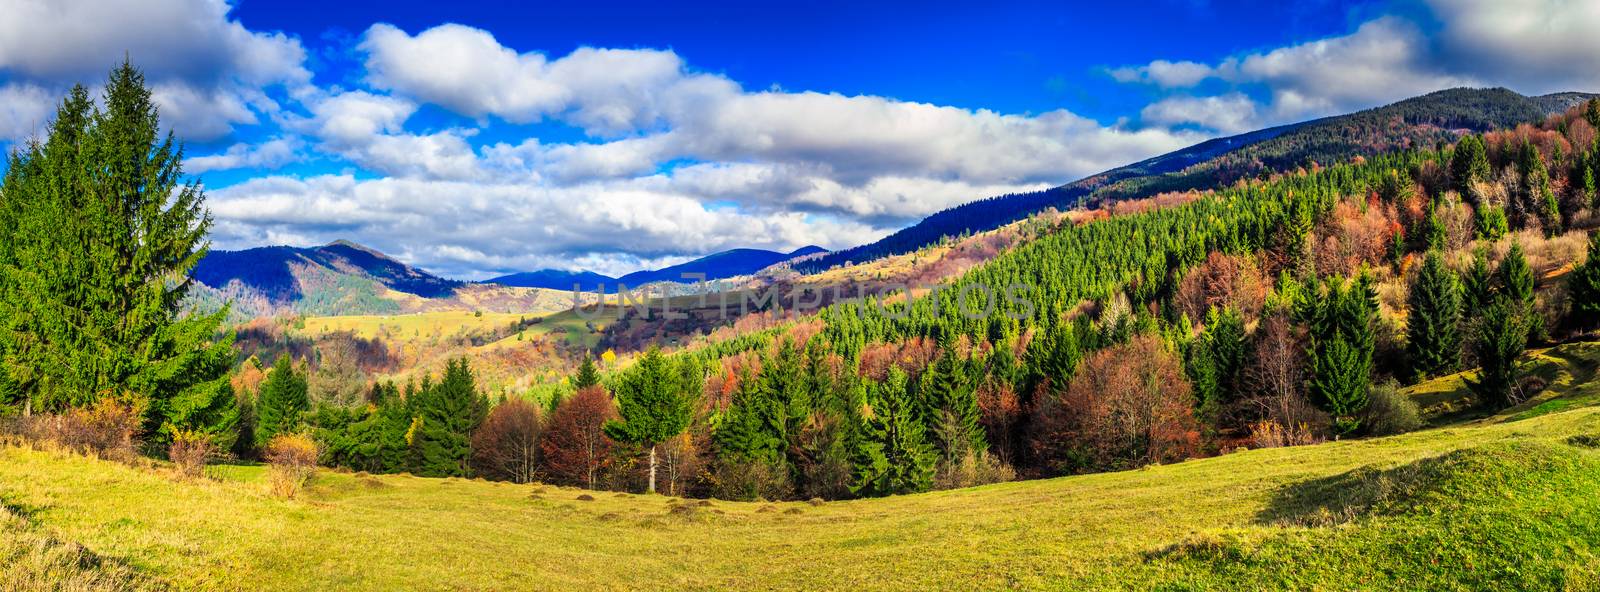 coniferous forest in autumn  mountains  by Pellinni